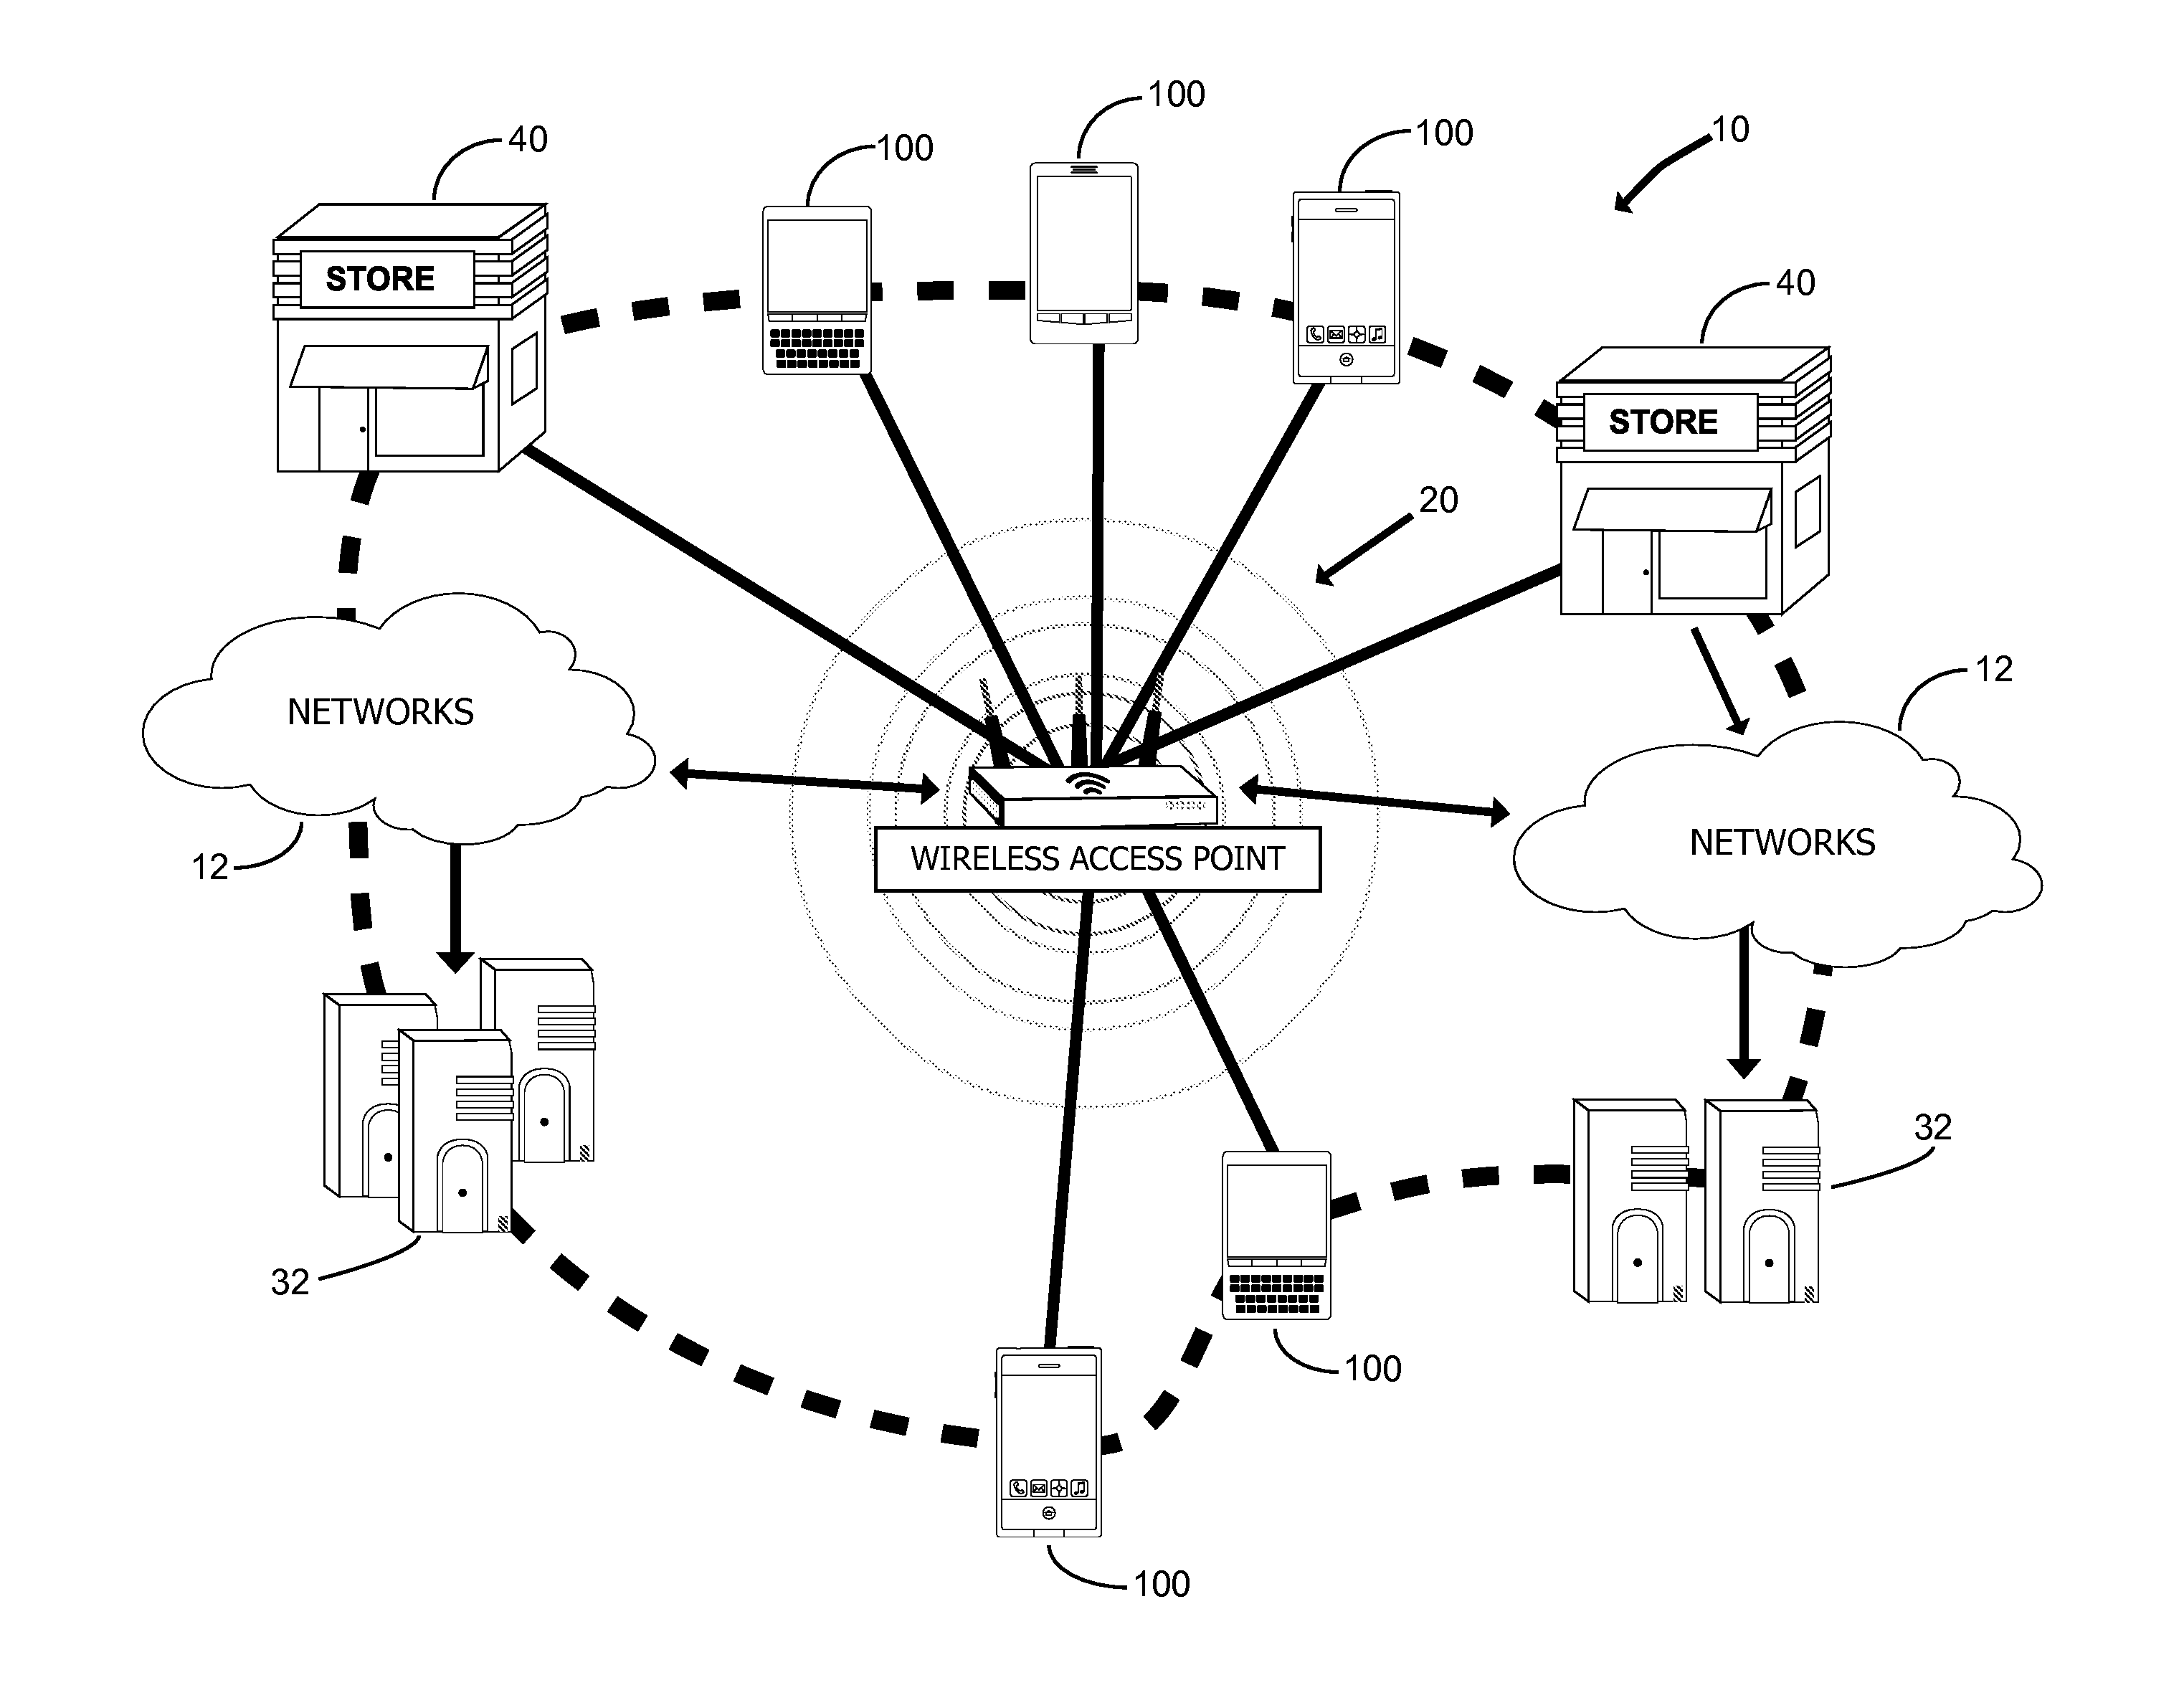 System and method for providing enhanced local access to commercial establishments and local social networking